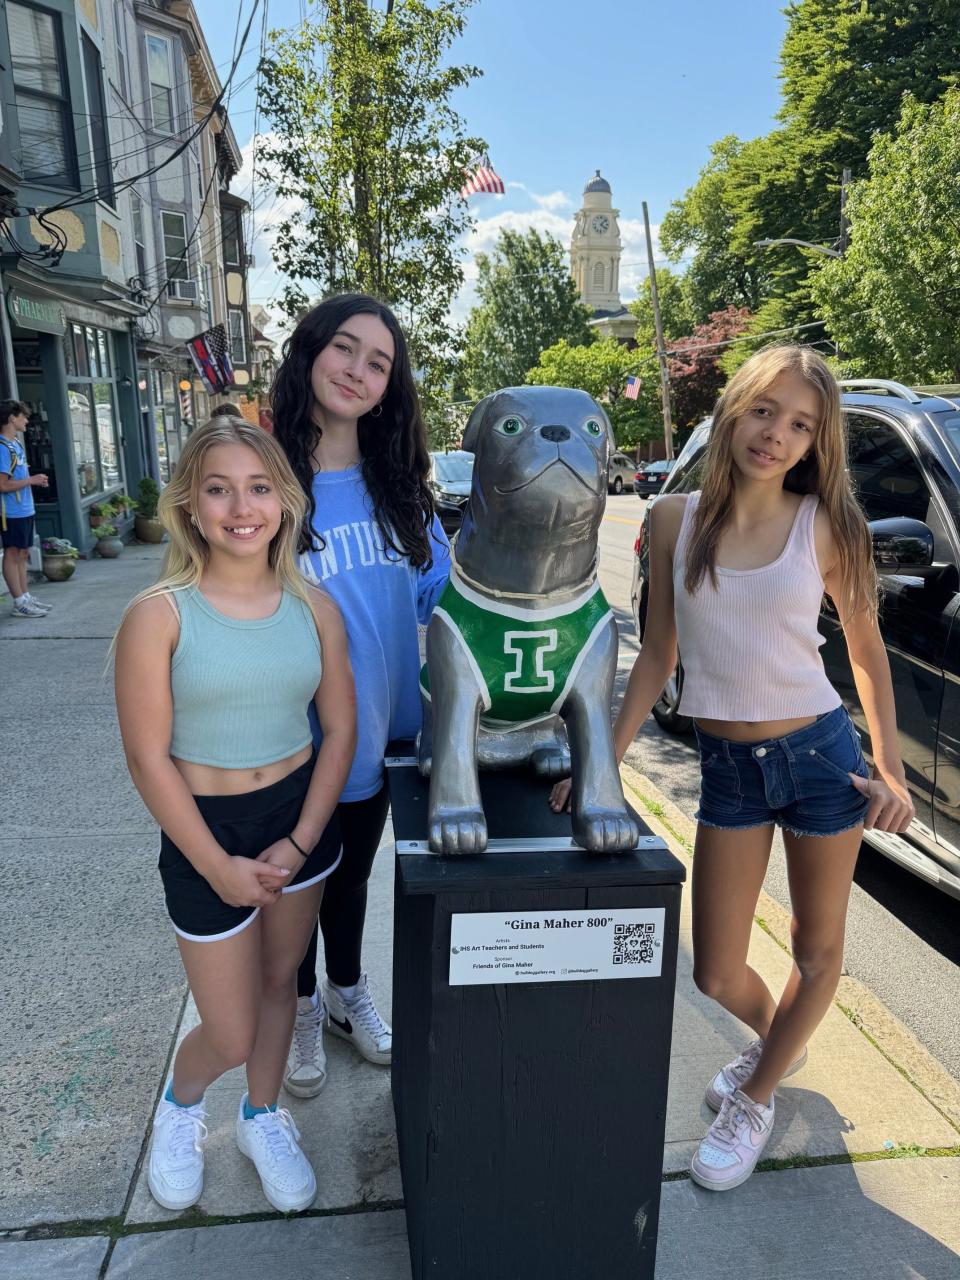 "Gina Maher 800" -- the creation of Irvington High School art teachers and students and sponsored by friends of Gina Maher -- celebrates the Irvington girls' basketball coach's 800th victory. It is one of the 27 bulldog statues that make up the 2024 Bulldog Walking Gallery on Main and Bridge streets in Irvington this summer. The statues, painted by local artists, depict connections to Irvington and will be auctioned off in the fall to raise funds to beautify the village. Last year's inaugural gallery raised nearly $17,000.